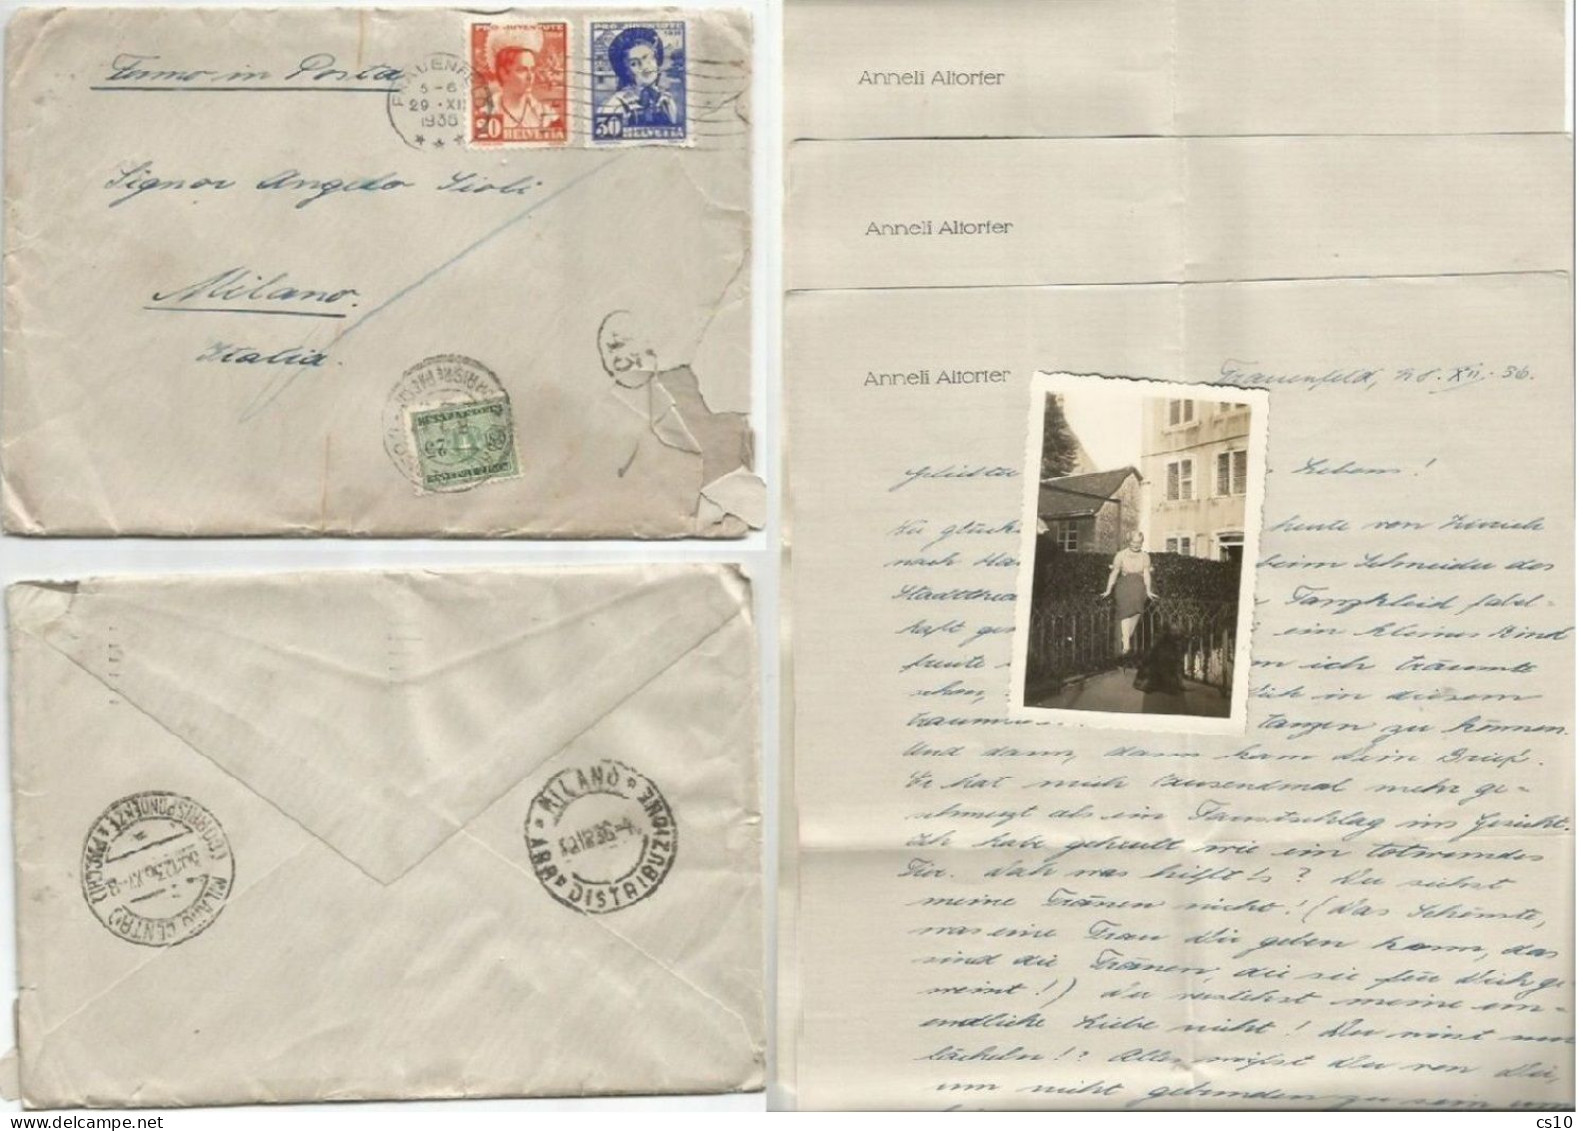 Suisse Frauenfeld 29dec1936 To Italy Fermo Posta Poste Restante With 2v PJ 1936 Taxed P.Due + Photo + 3 Pages Text - Segnatasse